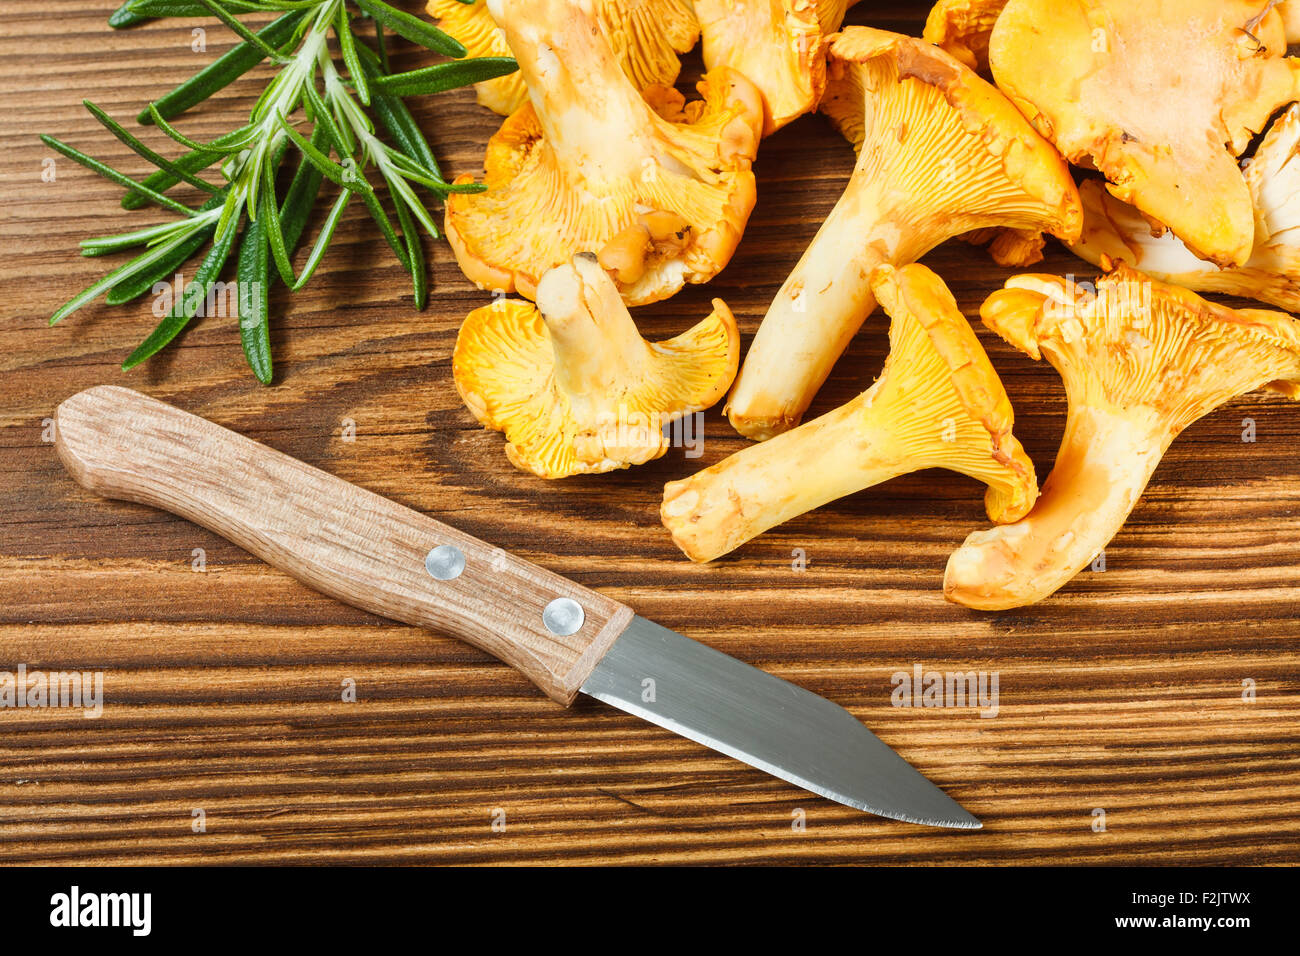 Yellow chanterelles and knife on wooden table Stock Photo